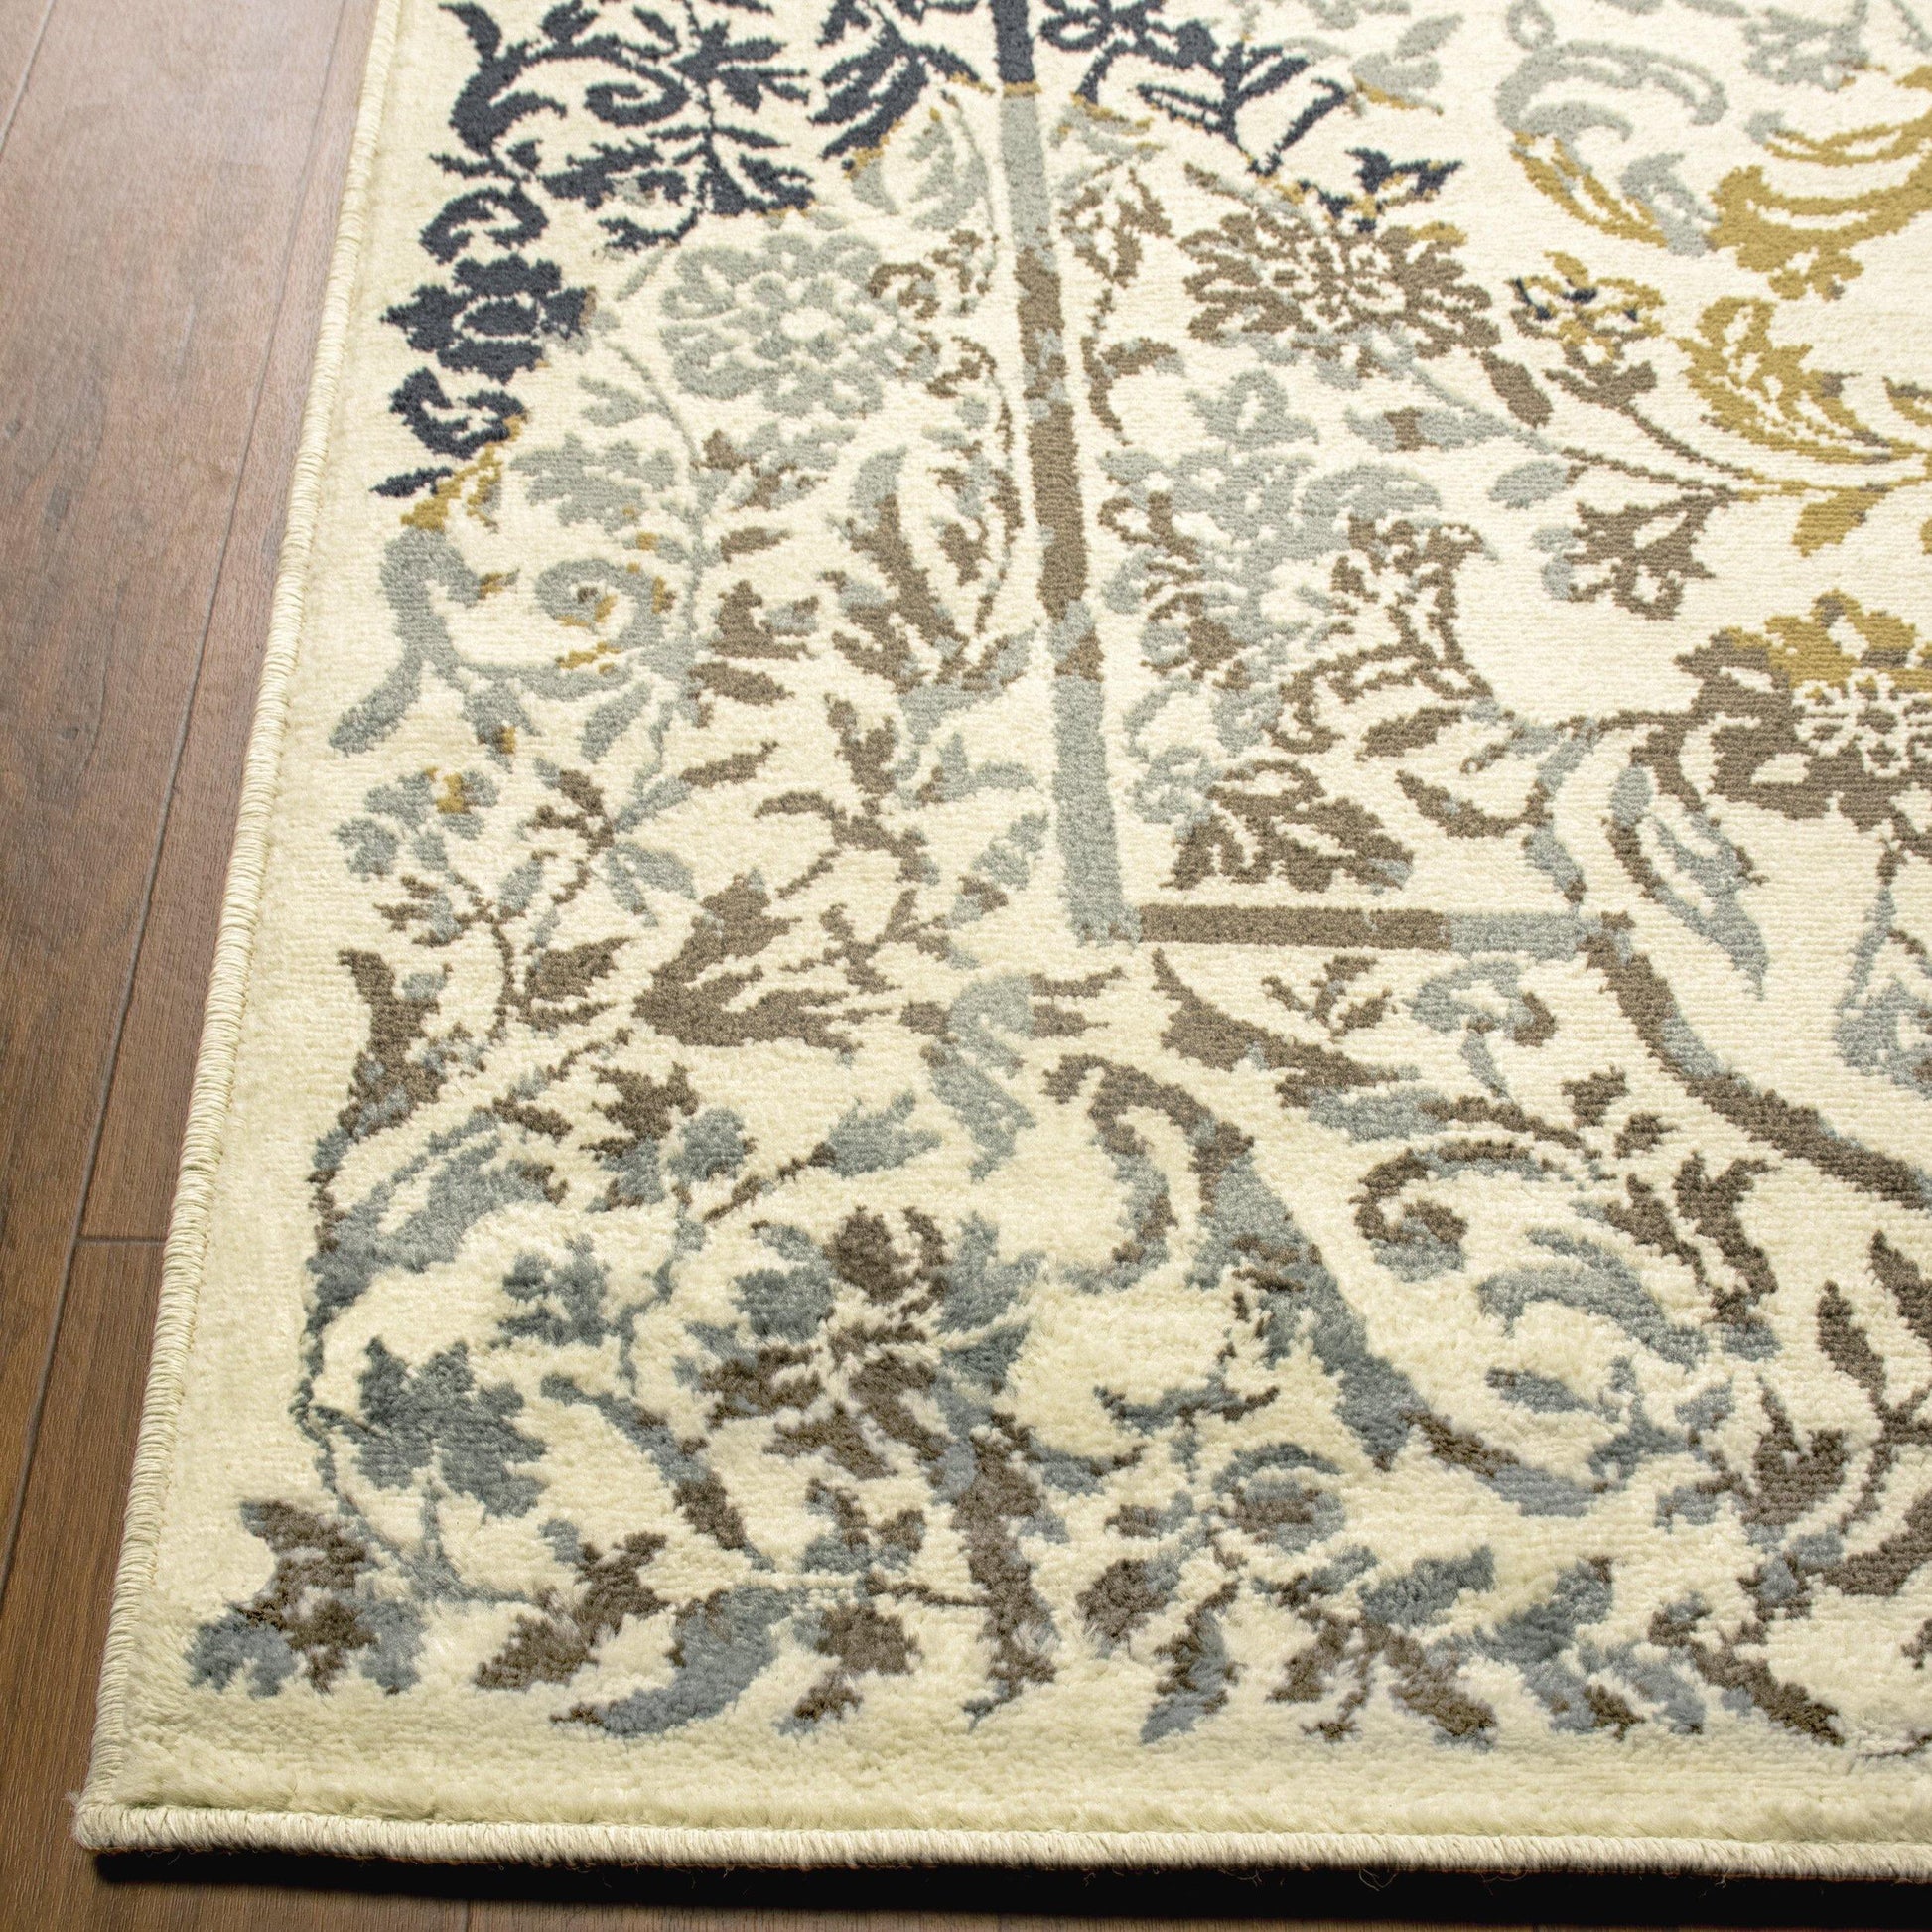 Ariza Oriental Traditional Floral Rug FredCo